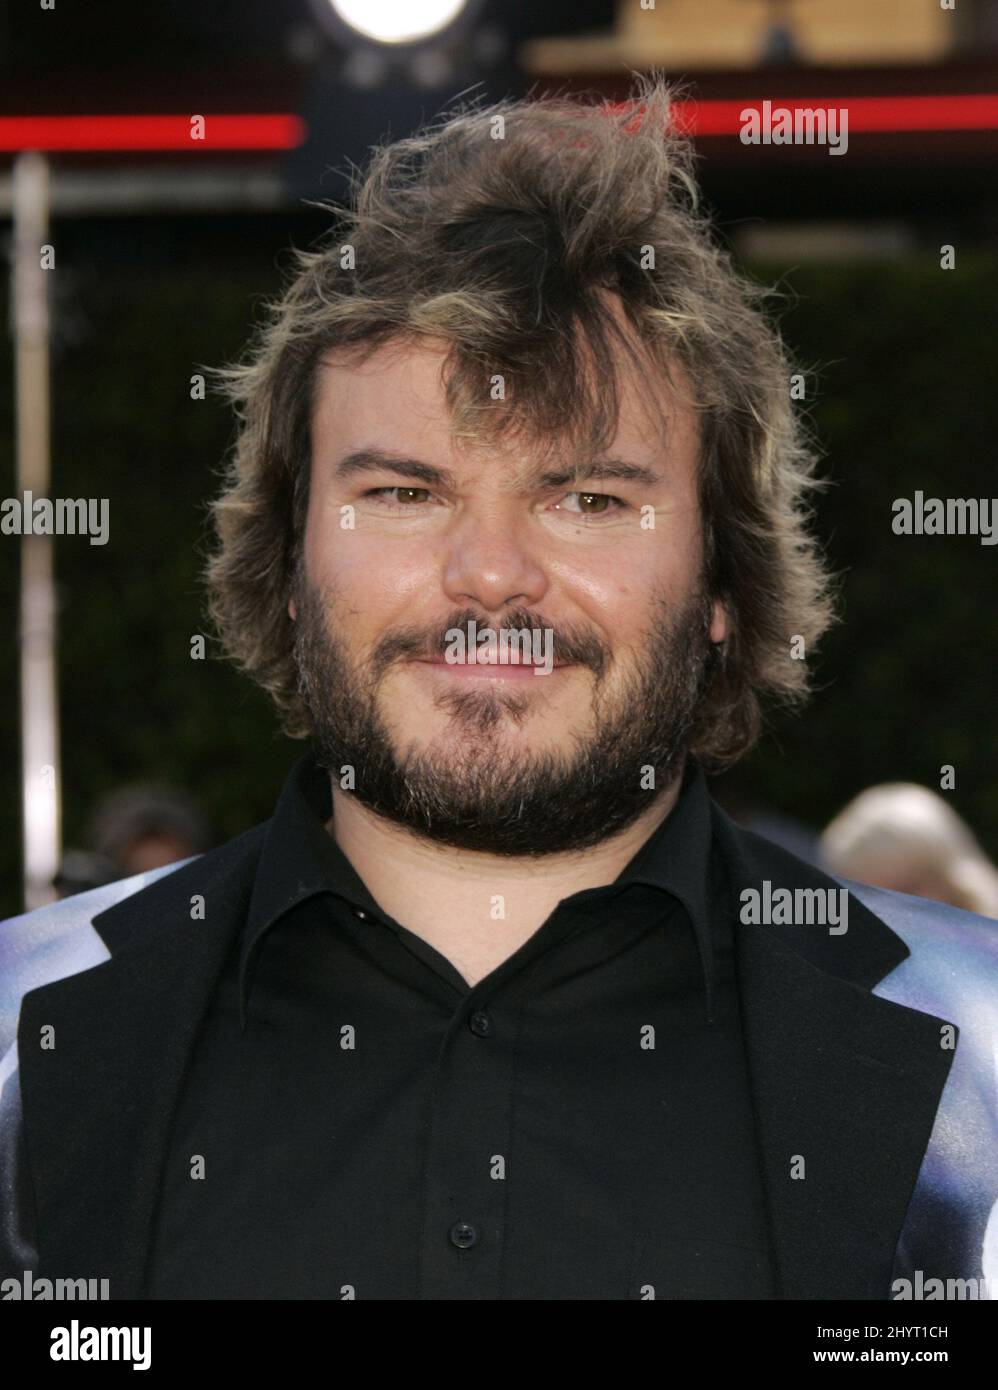 Jack Black at the 'Tropic Thunder' Los Angeles Premiere held at the Mann Village Theatre in Westwood, CA. Stock Photo